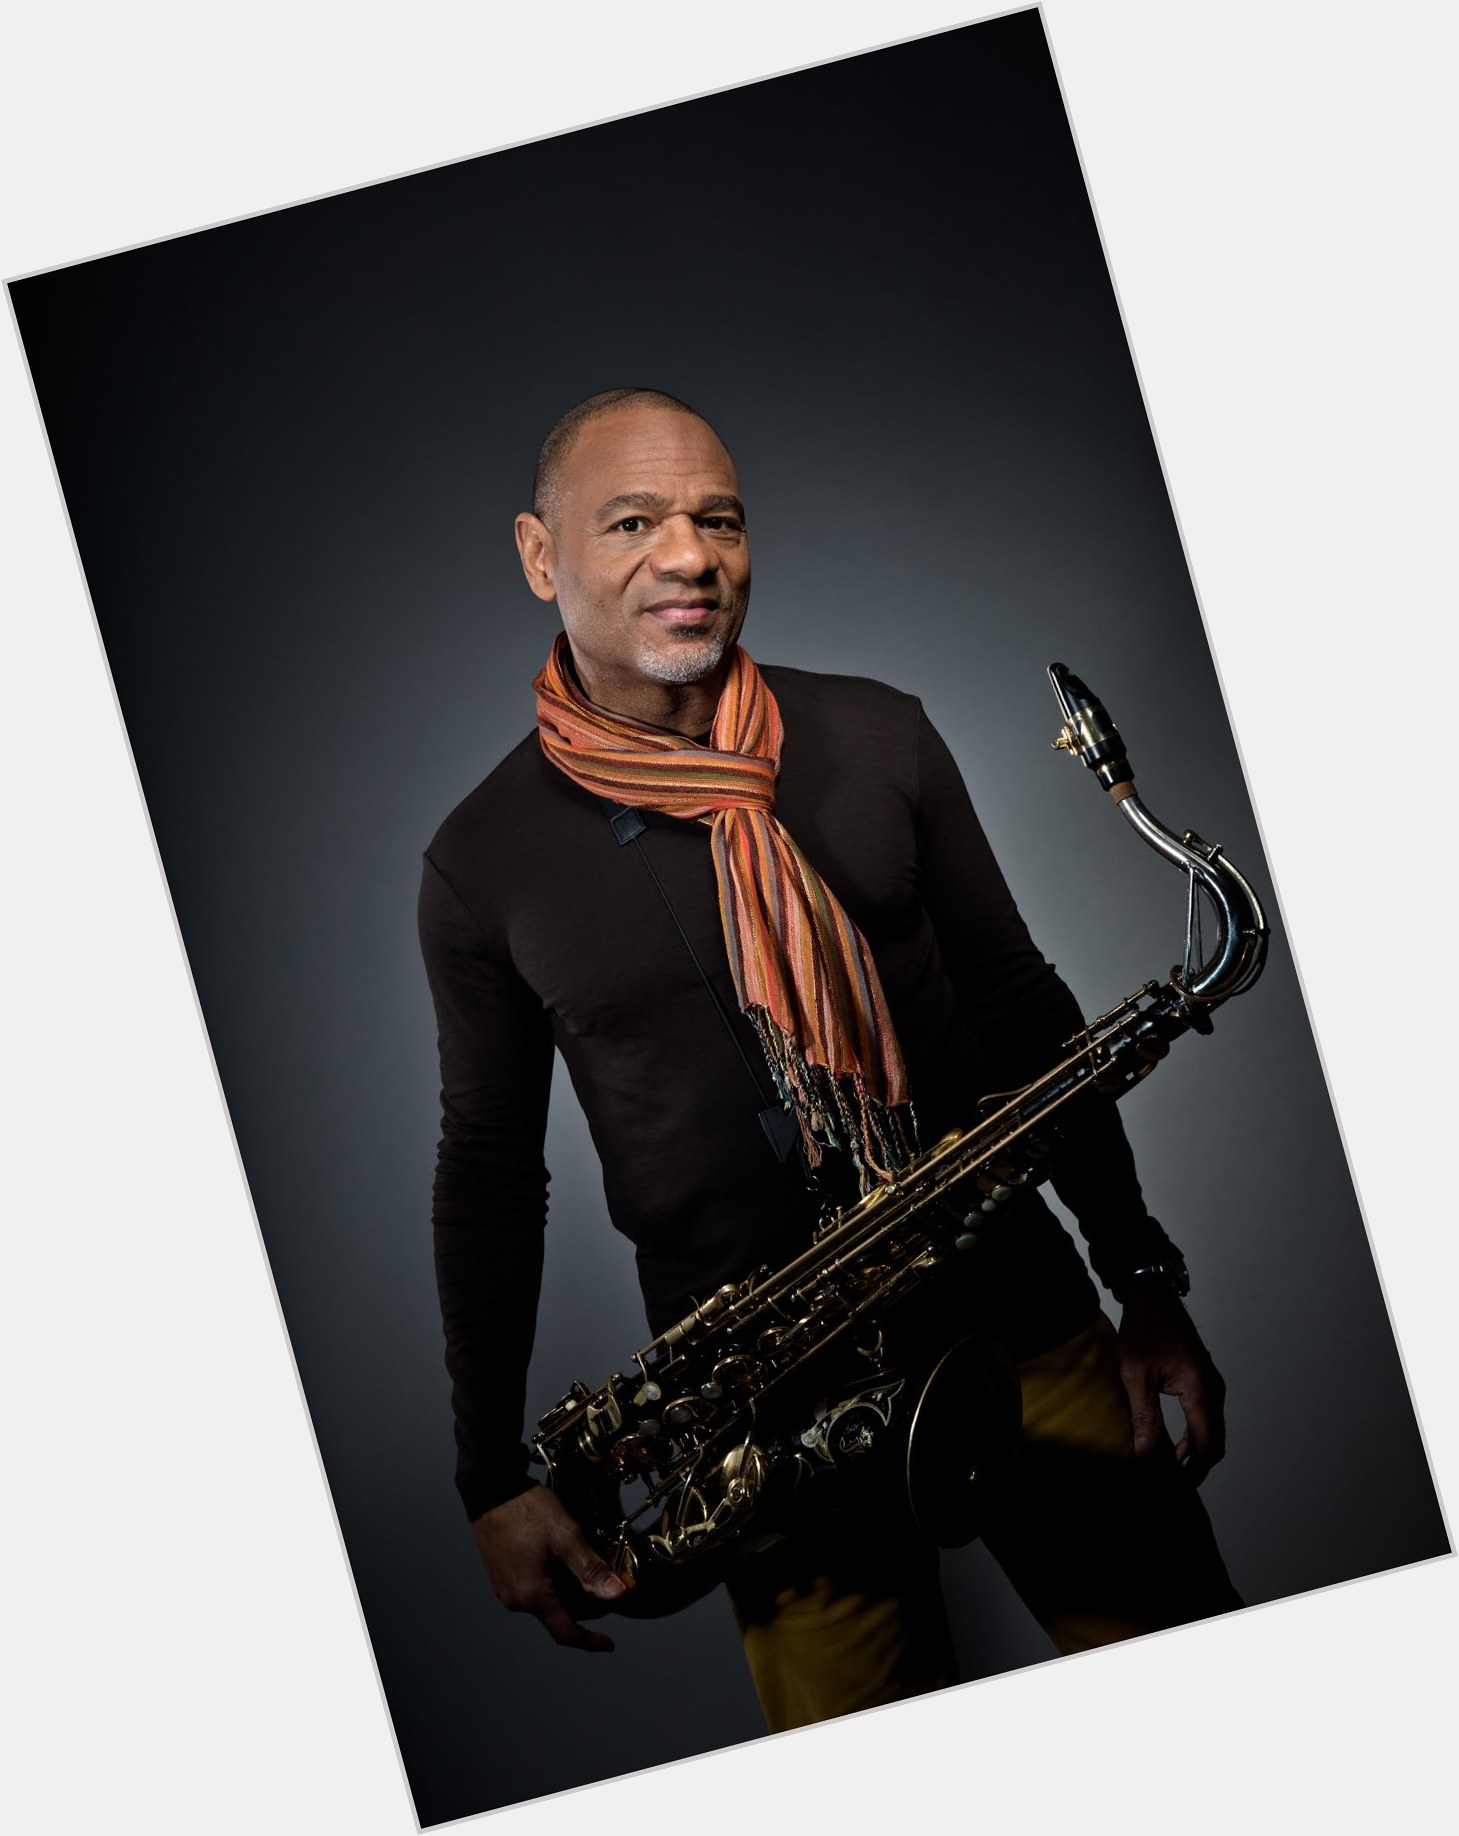 <a href="/hot-men/kirk-whalum/is-he-married-dating-what-saxophone-setup-everything">Kirk Whalum</a>  